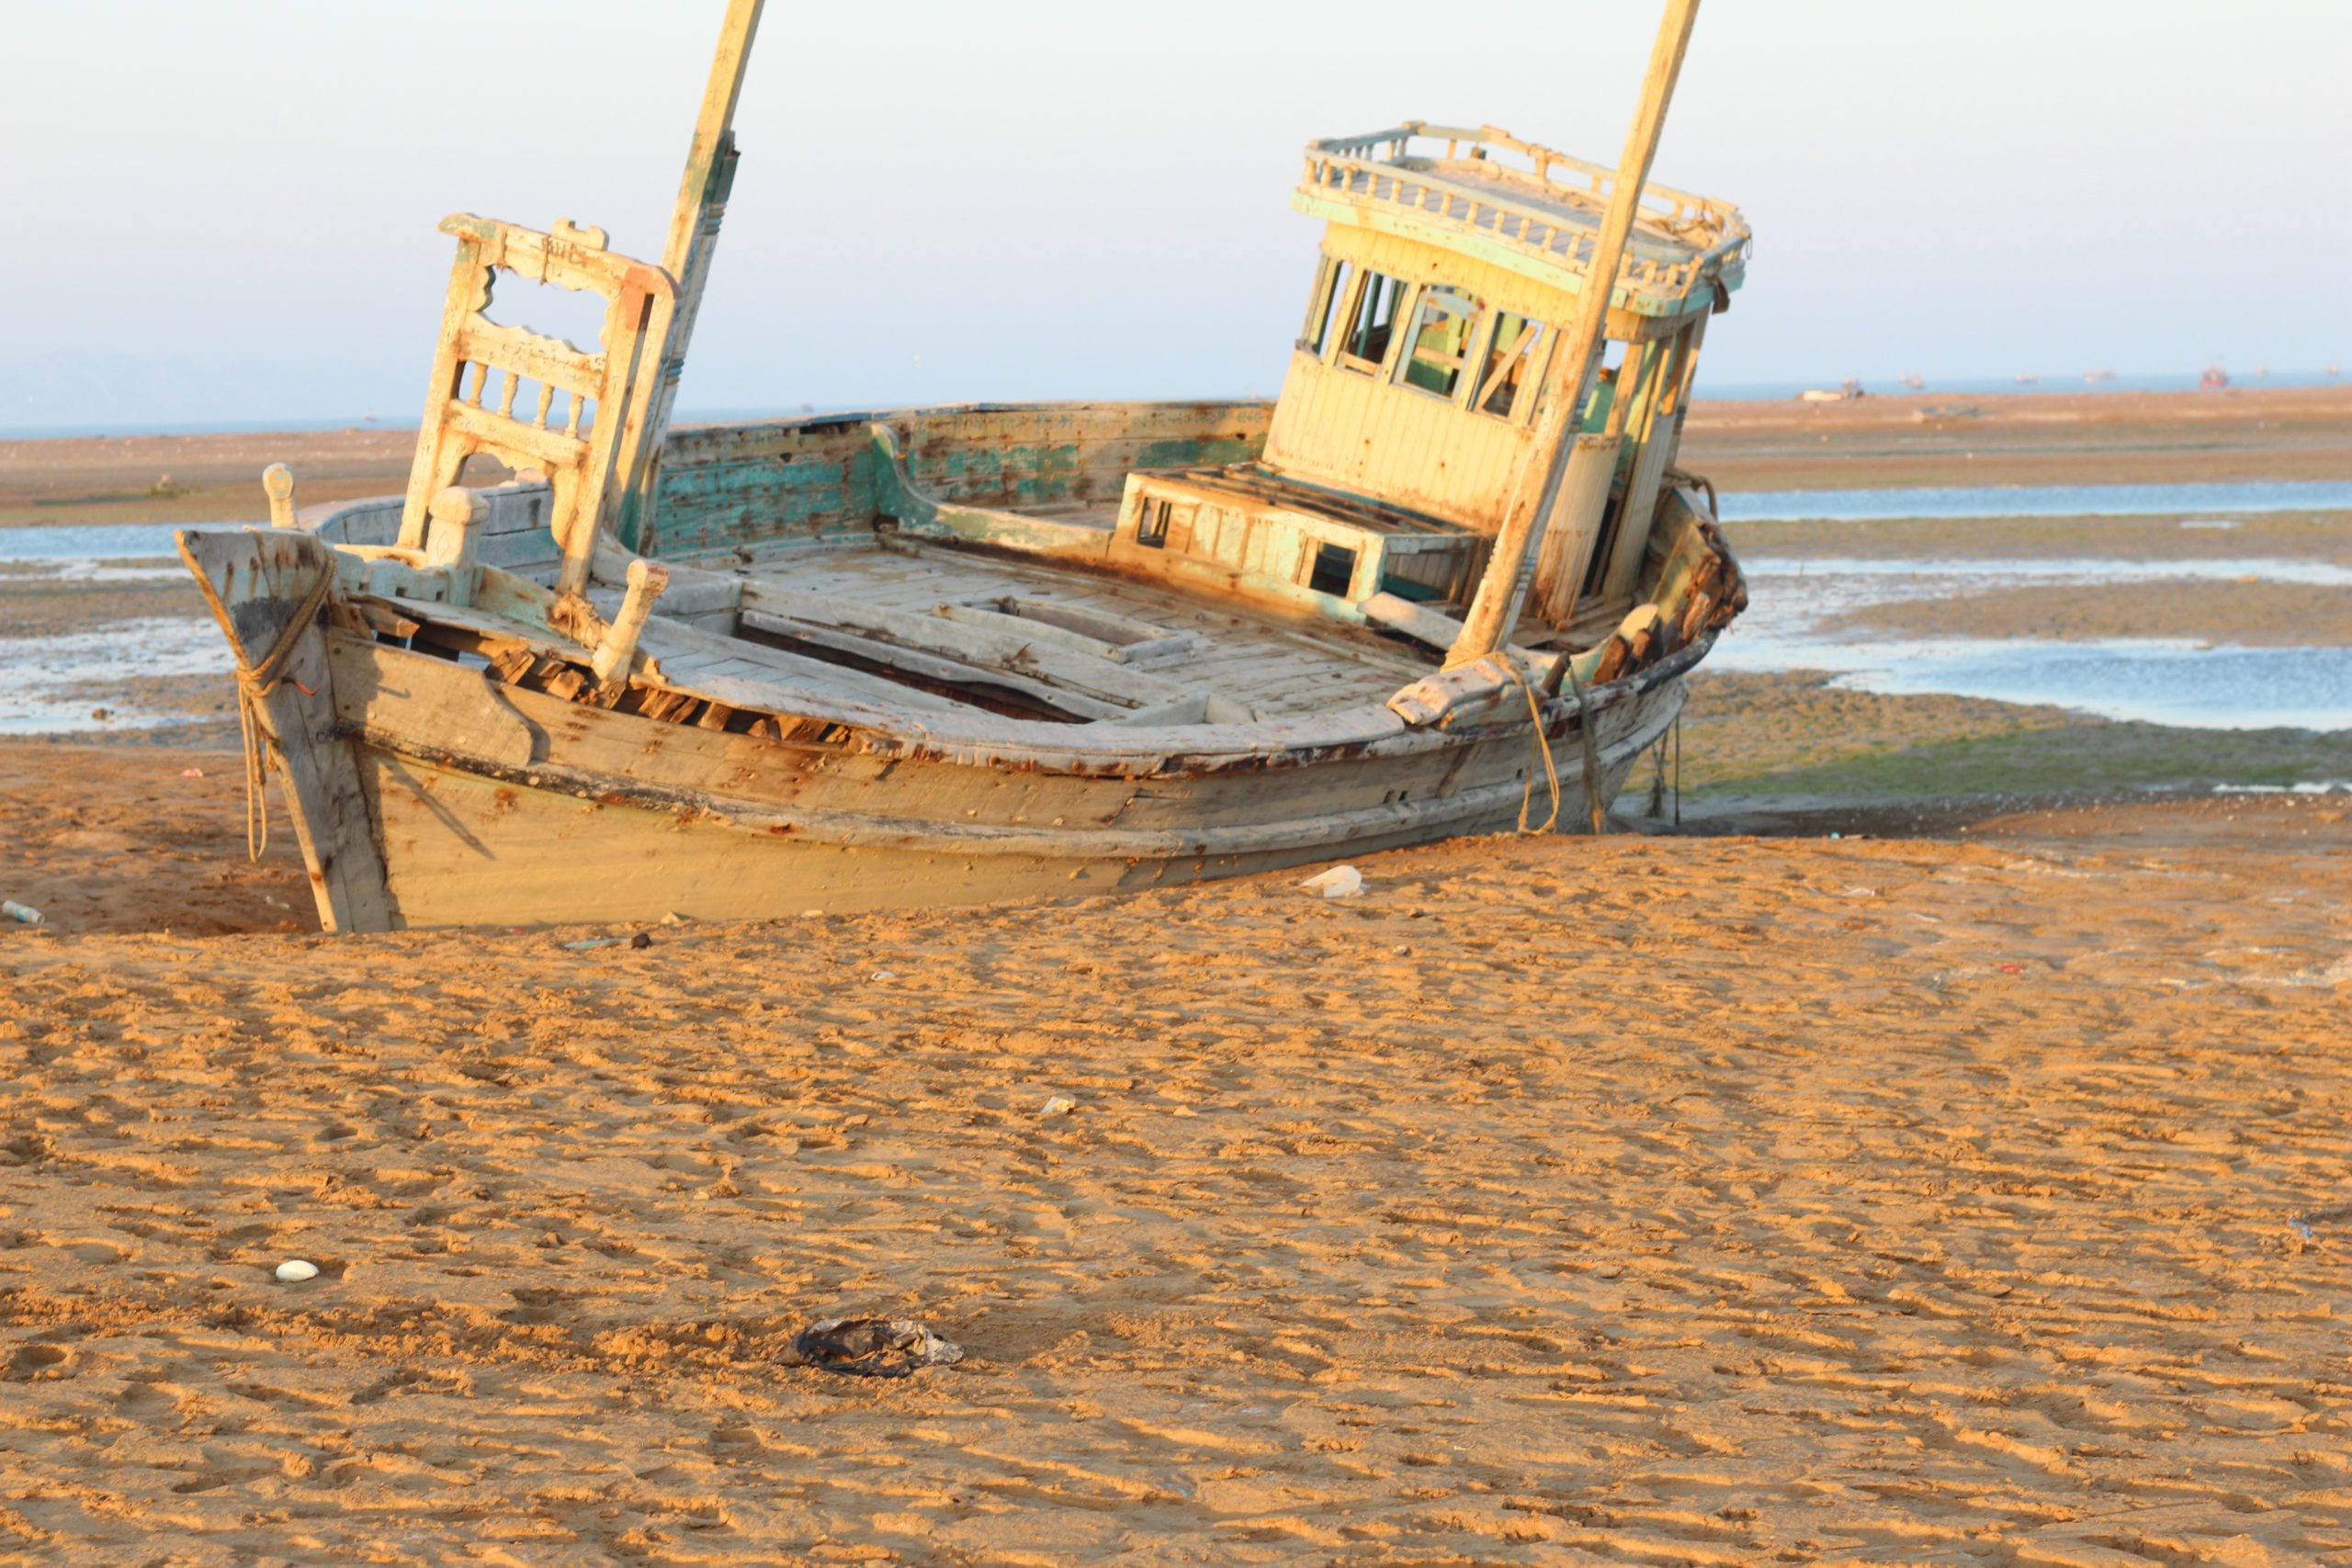 Another of the fishing boats abandoned on the Pasni beach 